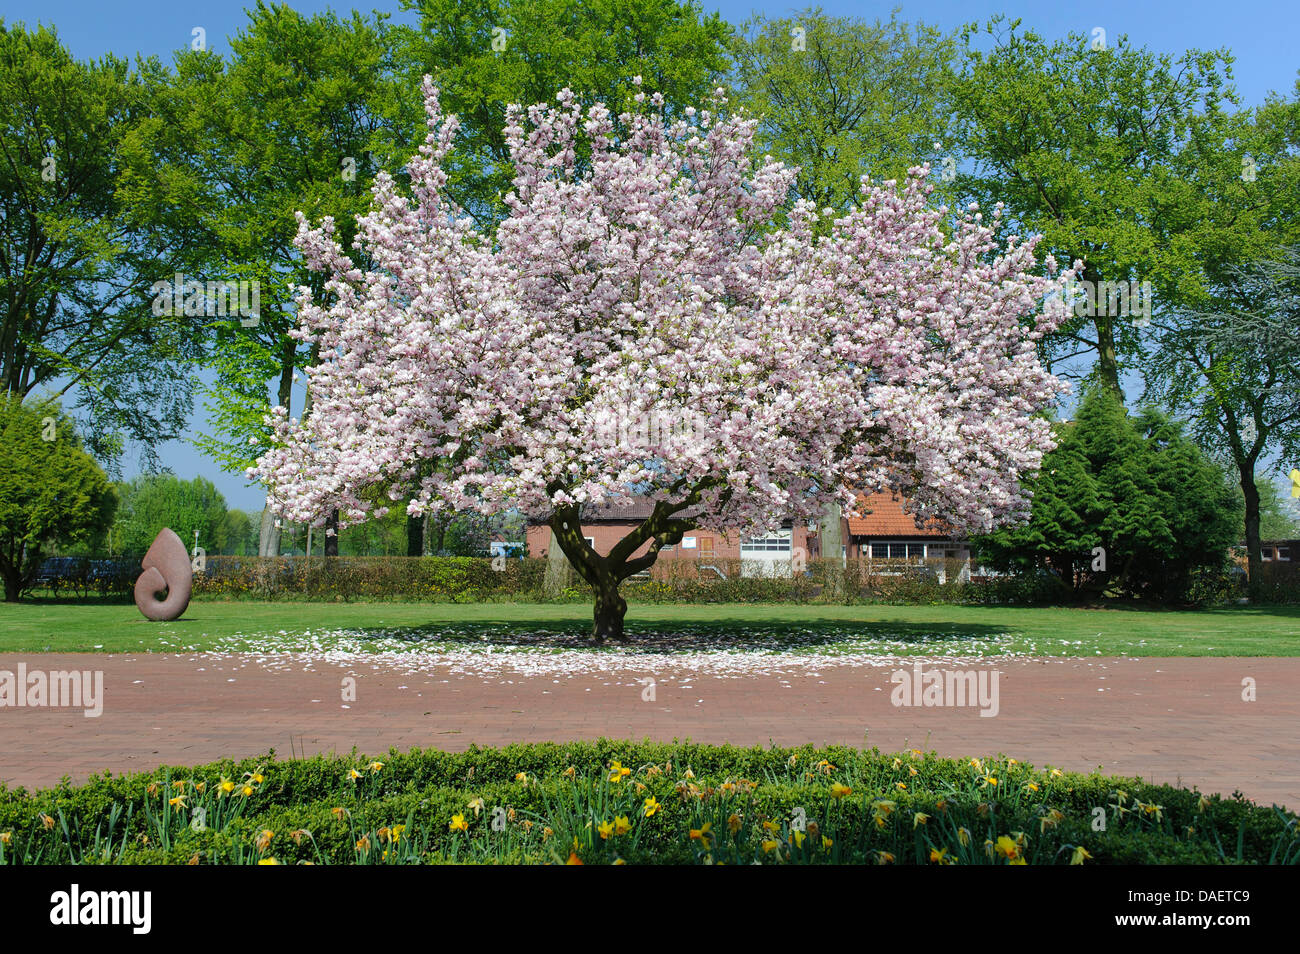 saucer magnolia (Magnolia x soulangiana, Magnolia soulangiana, Magnolia x soulangeana, Magnolia soulangeana), blooming magnolia with daffodills in the foreground, Germany, Stapelfeld Stock Photo